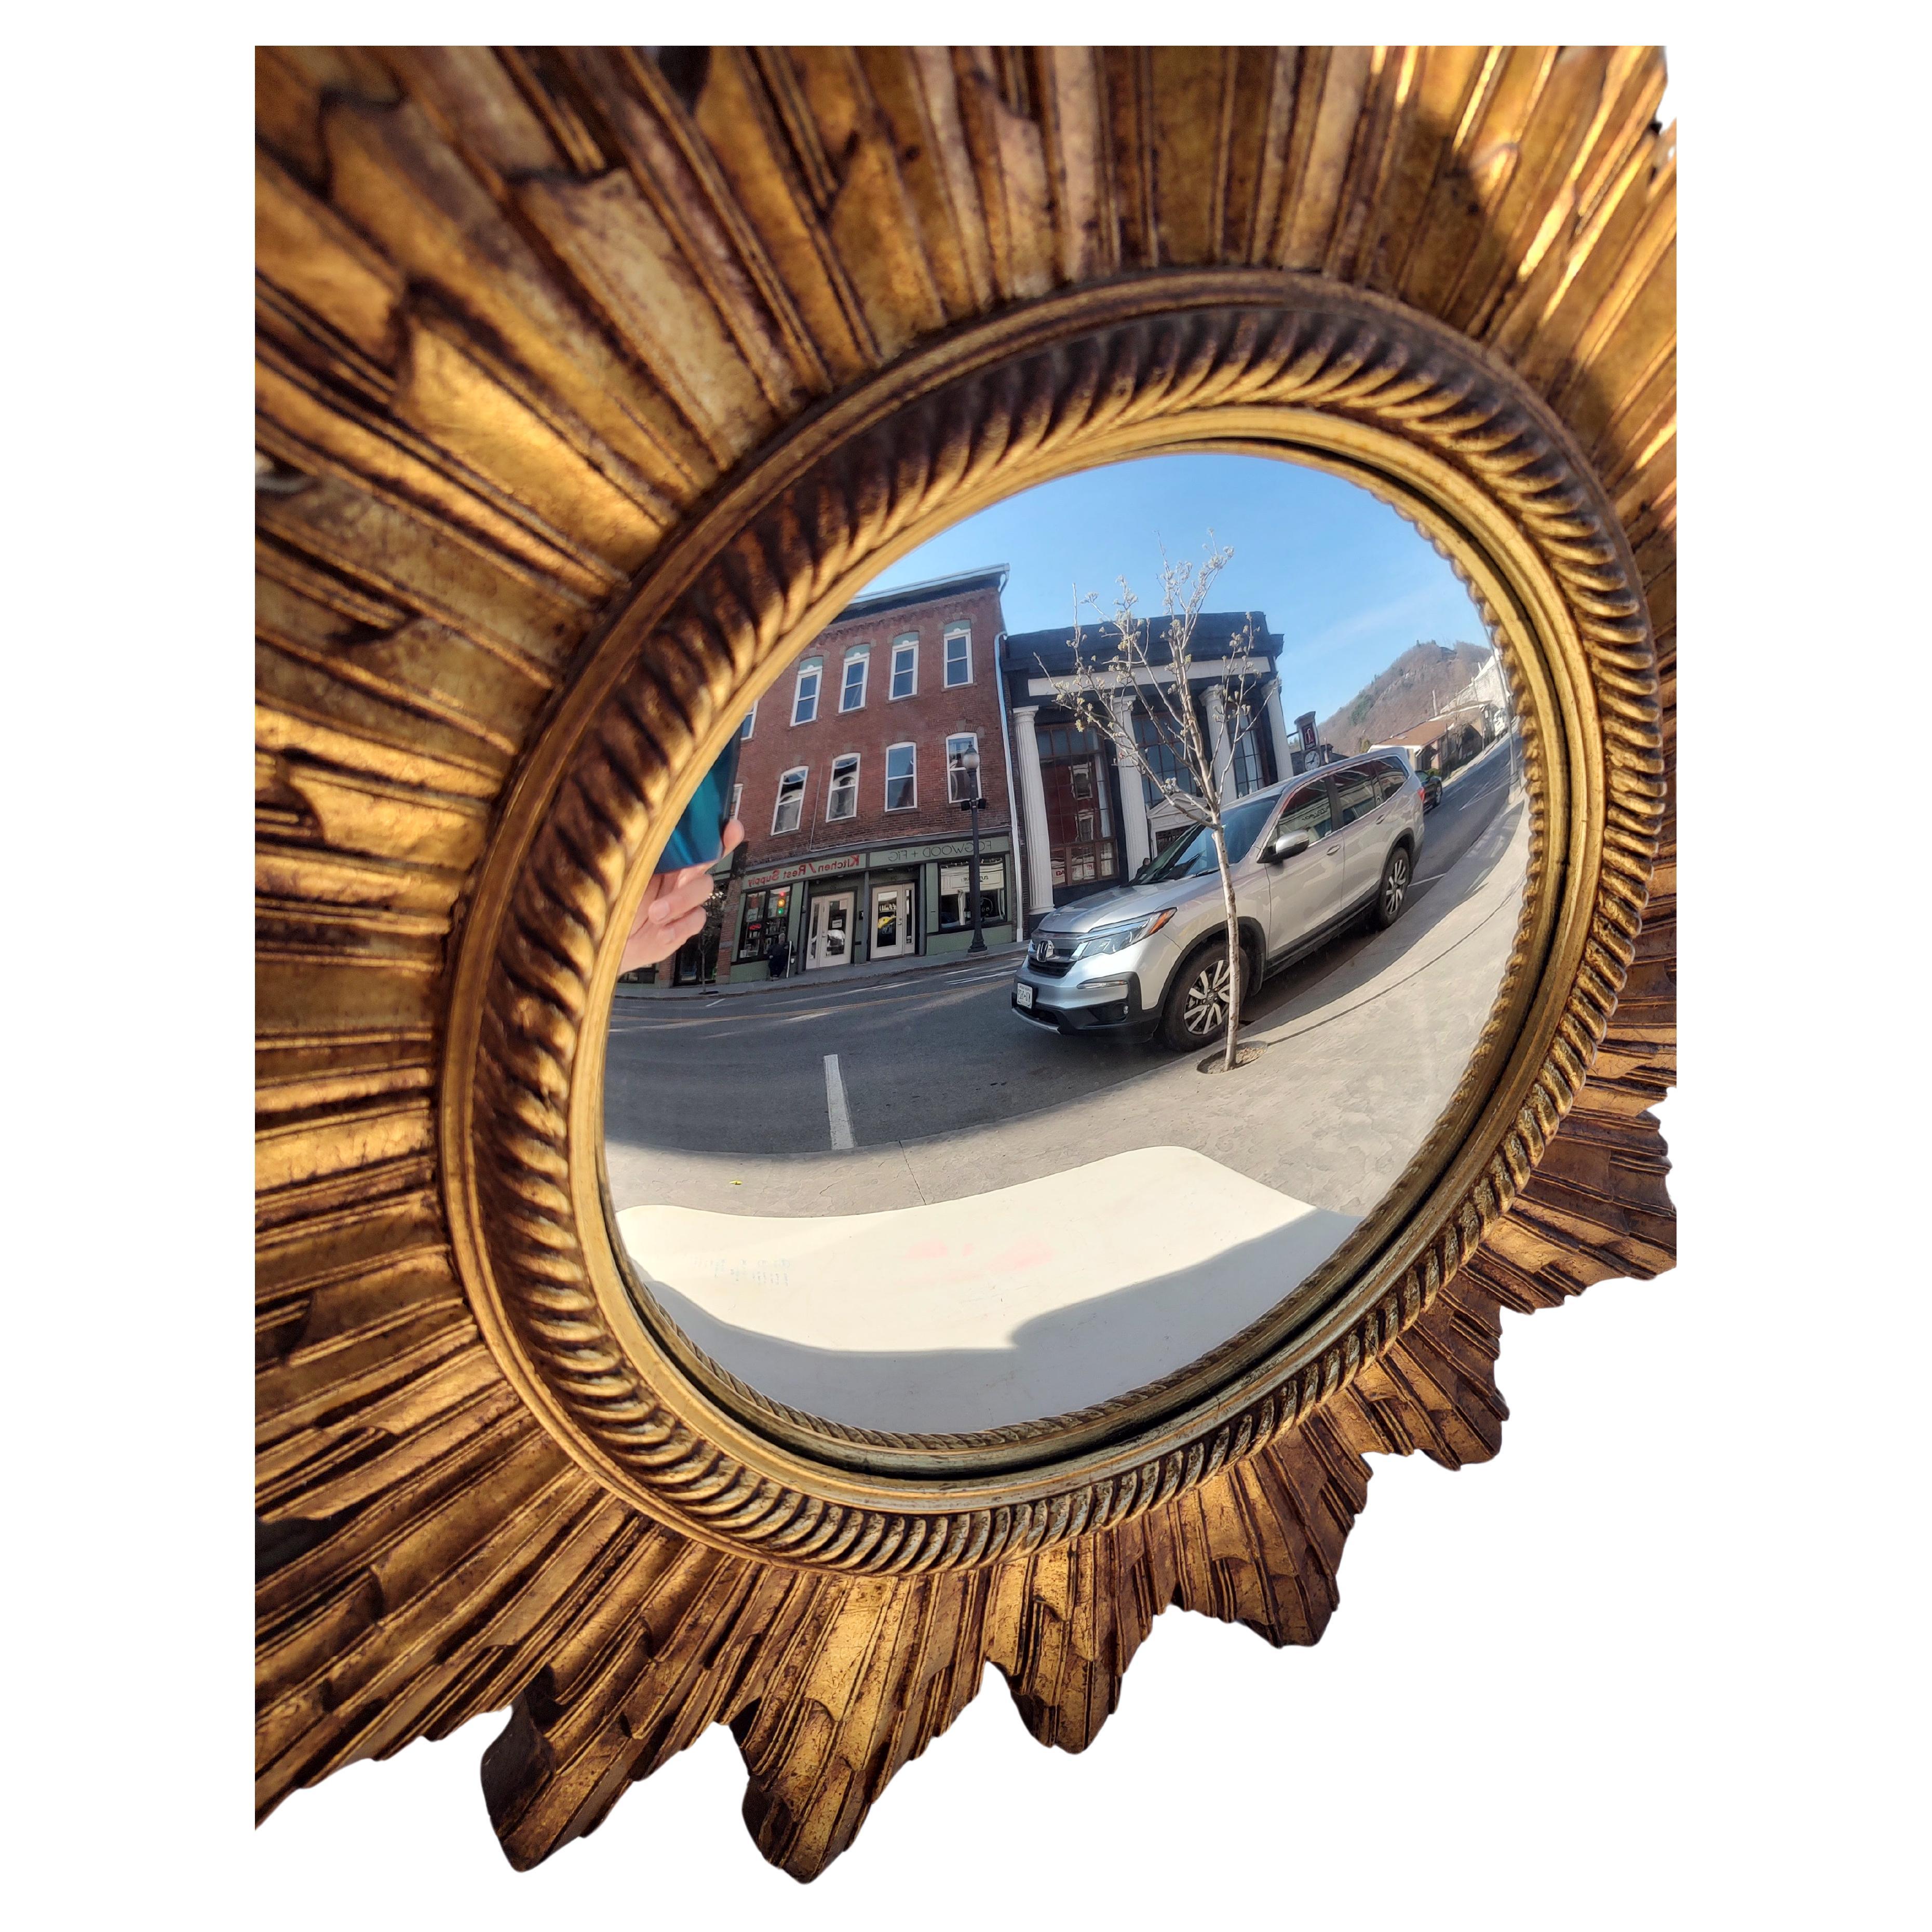 Wonderful hand carved giltwood convex mirror. In excellent vintage condition with minimal wear, see pics. 24 inch total diameter with a 11 inch convex mirror.